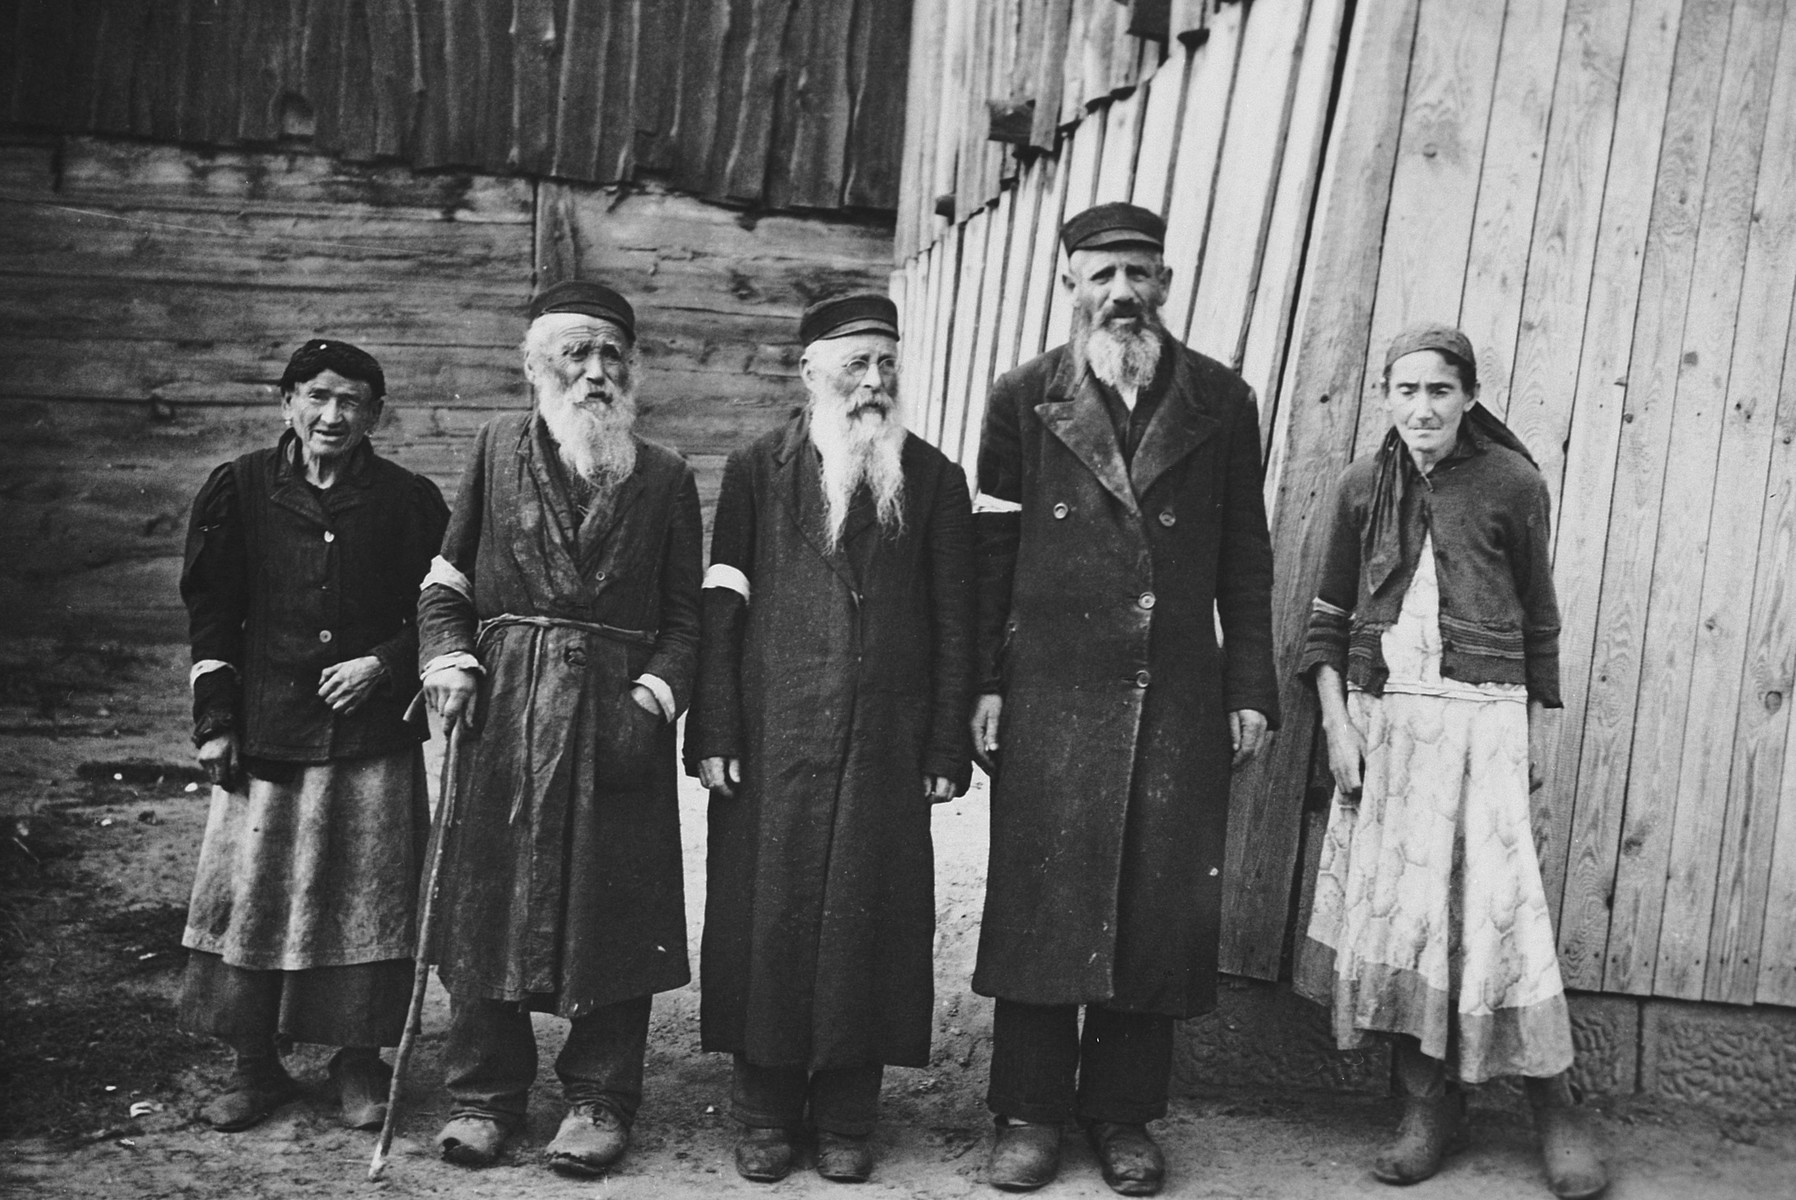 Portrait of two older women and three older men wearing armbands standing in front of a wooden house. 

The caption of the SS-Archiv says "Original Juden in (...) Sept. 1941" (original Jews in (...) Sept. 1941).